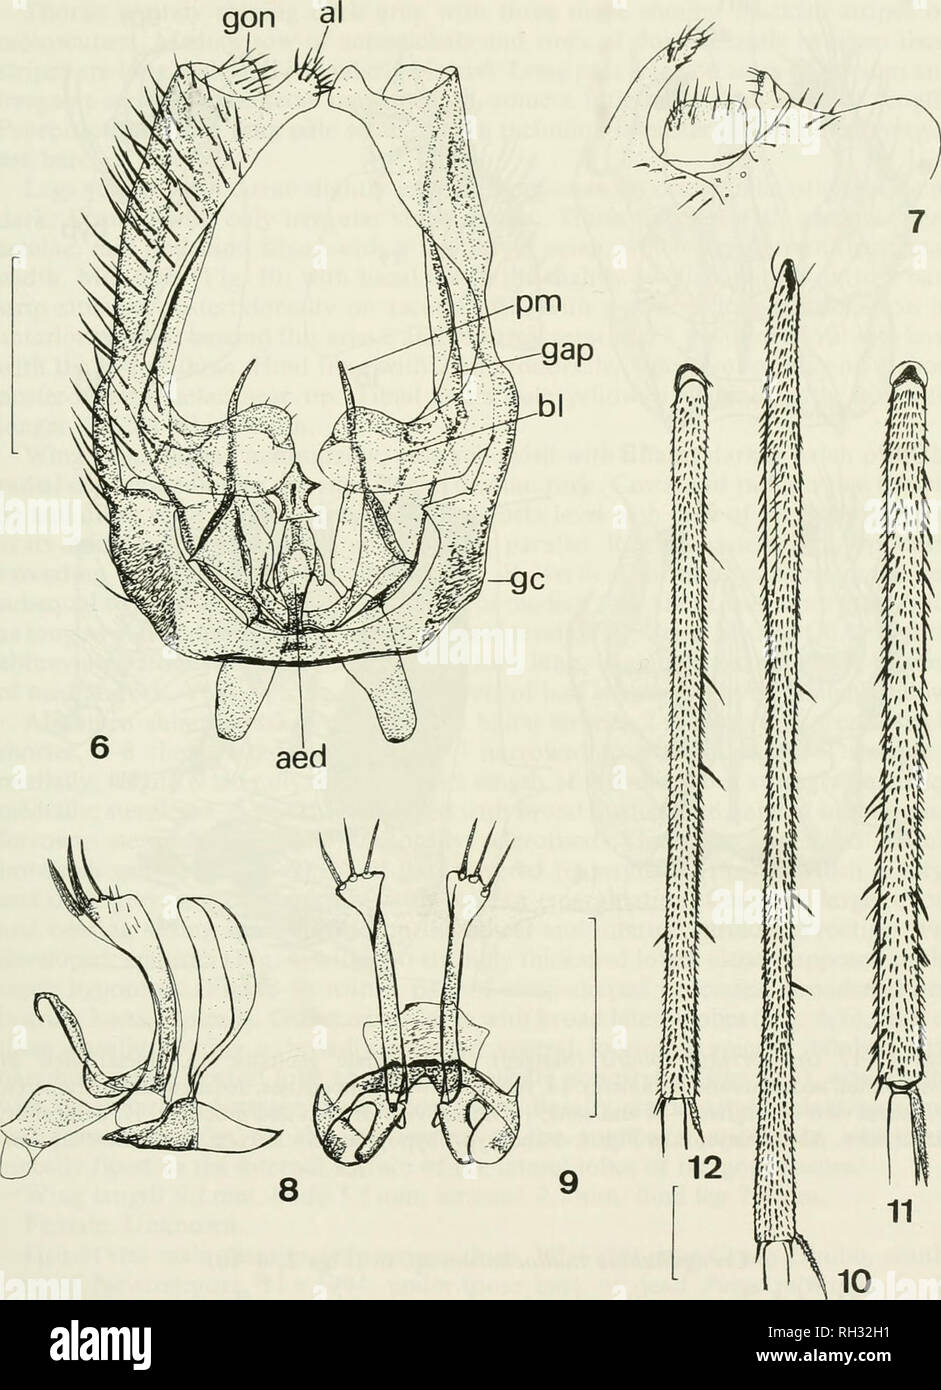 . British journal of entomology and natural history. Natural history; Entomology. BR. J. ENT. NAT. HIST.. 12: 1999. Figs 6-12. 6-9, male genitalia of Creagdhubhia mallochorum sp. n.: 6, ventral view of gonocoxites, aedeagus and parameres; 7, ventrolateral view of gonostylus; 8, lateral view of hypoproct; 9, ventral view of hypoproct. Scale line 0.25 mm. Abbreviations: aed = aedeagus, al = apical lobe of gonocoxite, bl = basal lobe of gonocoxite, gap = gonocoxal apodeme, gc = gonocoxites. gon = gonostylus, pm = paramere. 10-12, male mid tibia, dorsal view: 10, Creagdhubhia mallochorum sp. n.; 1 Stock Photo